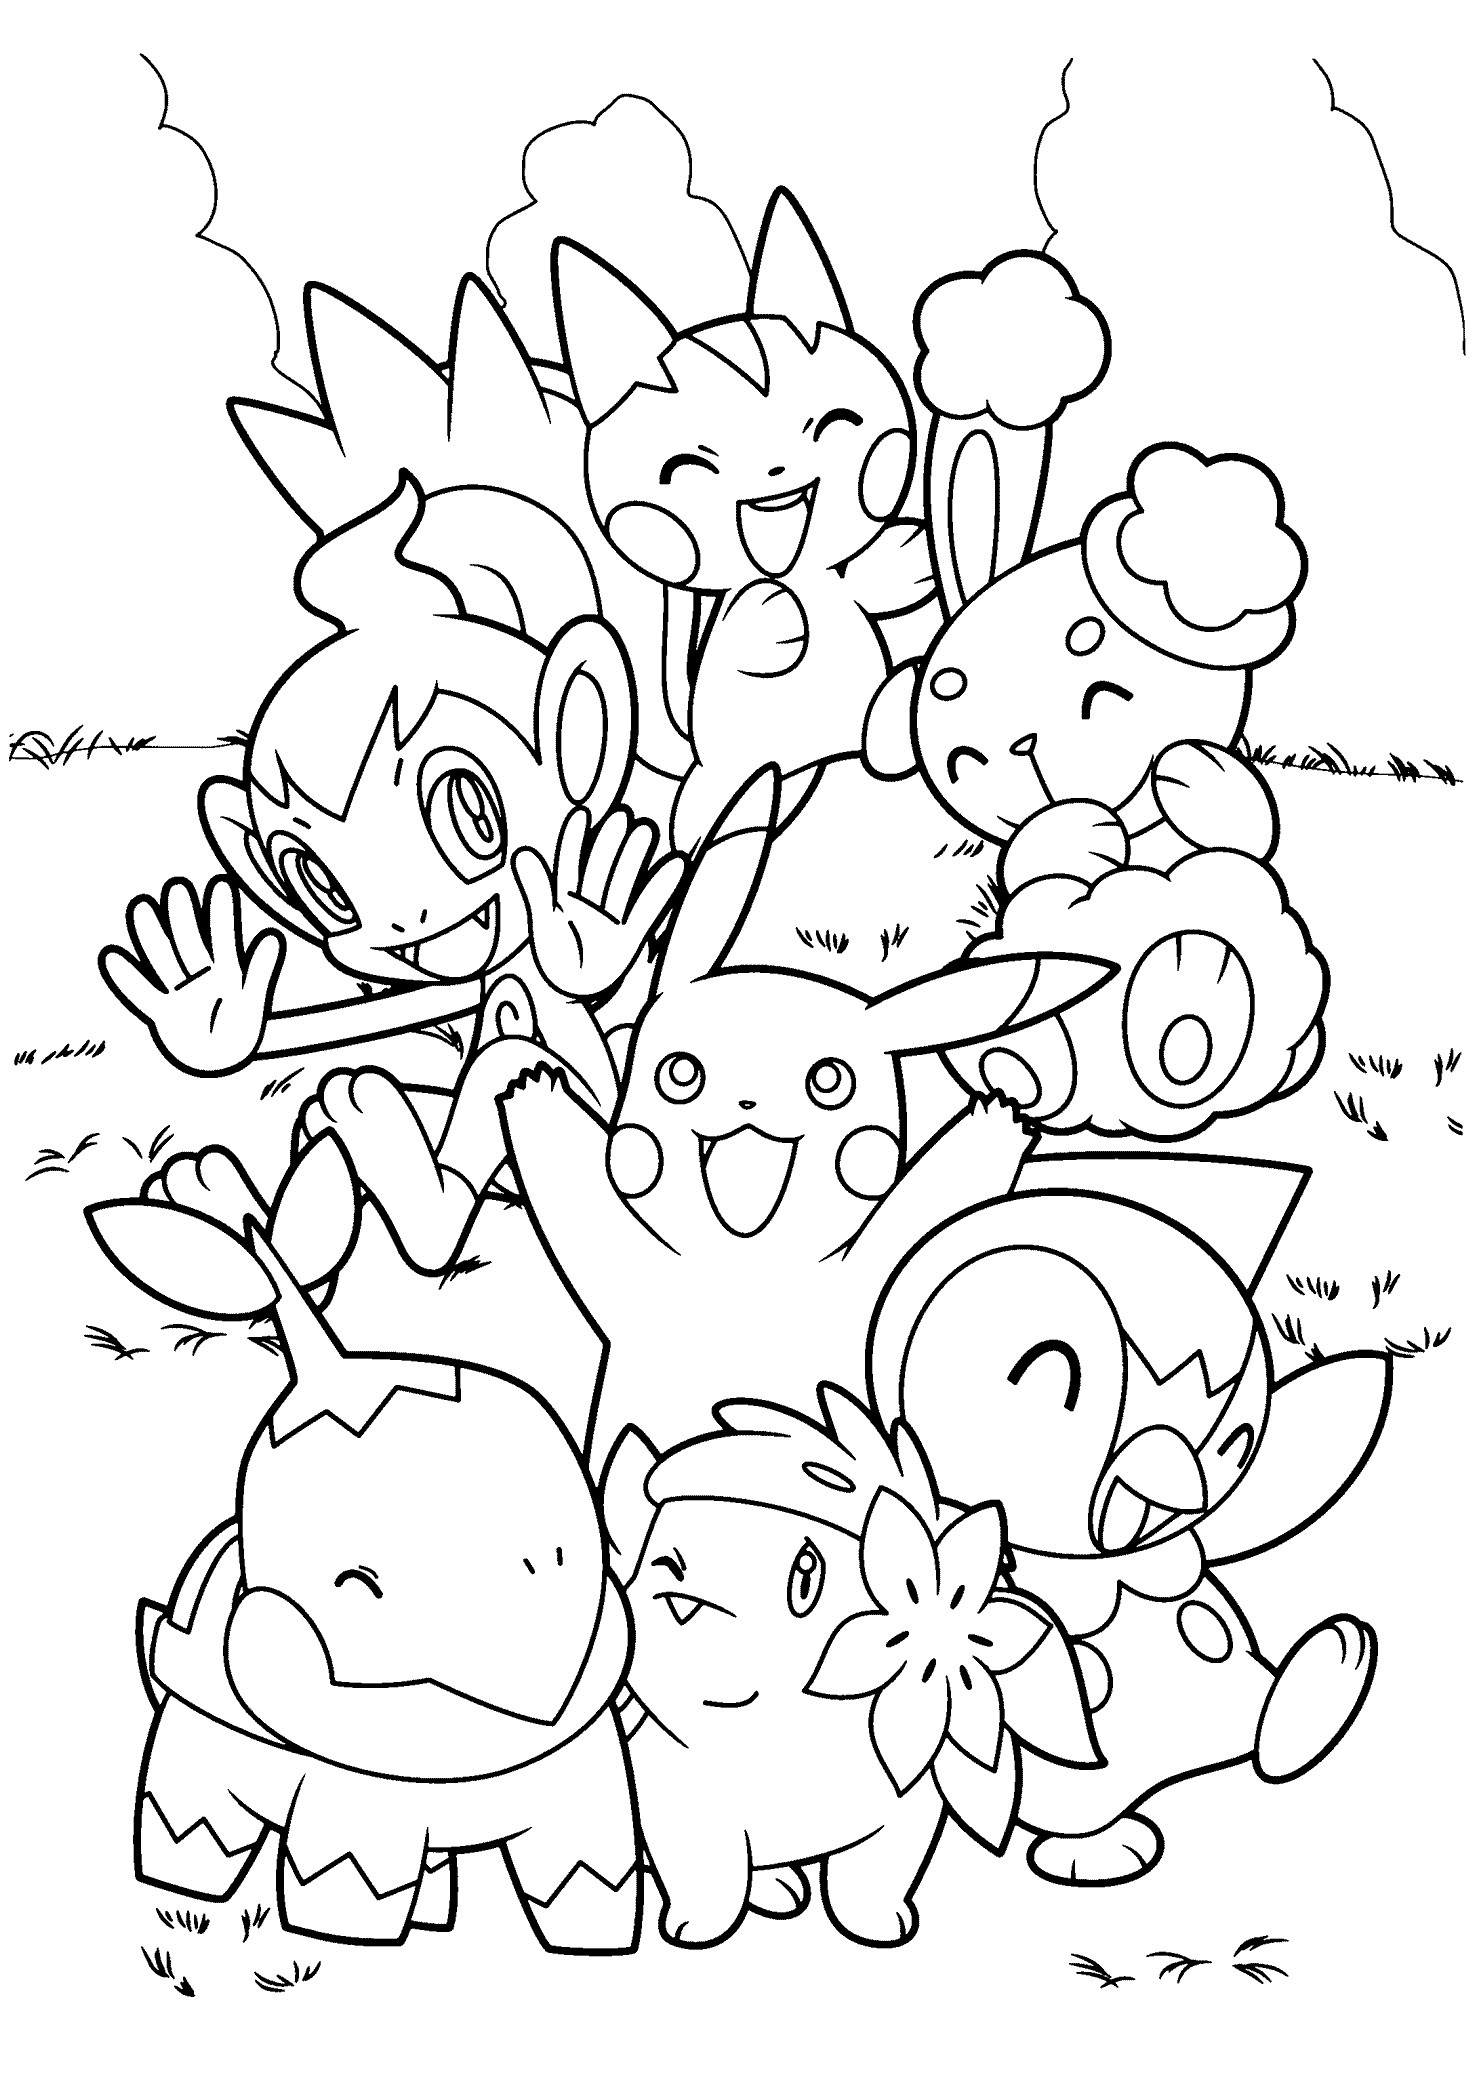 line Coloring Pages New top 75 Free Printable Pokemon Coloring Pages Line